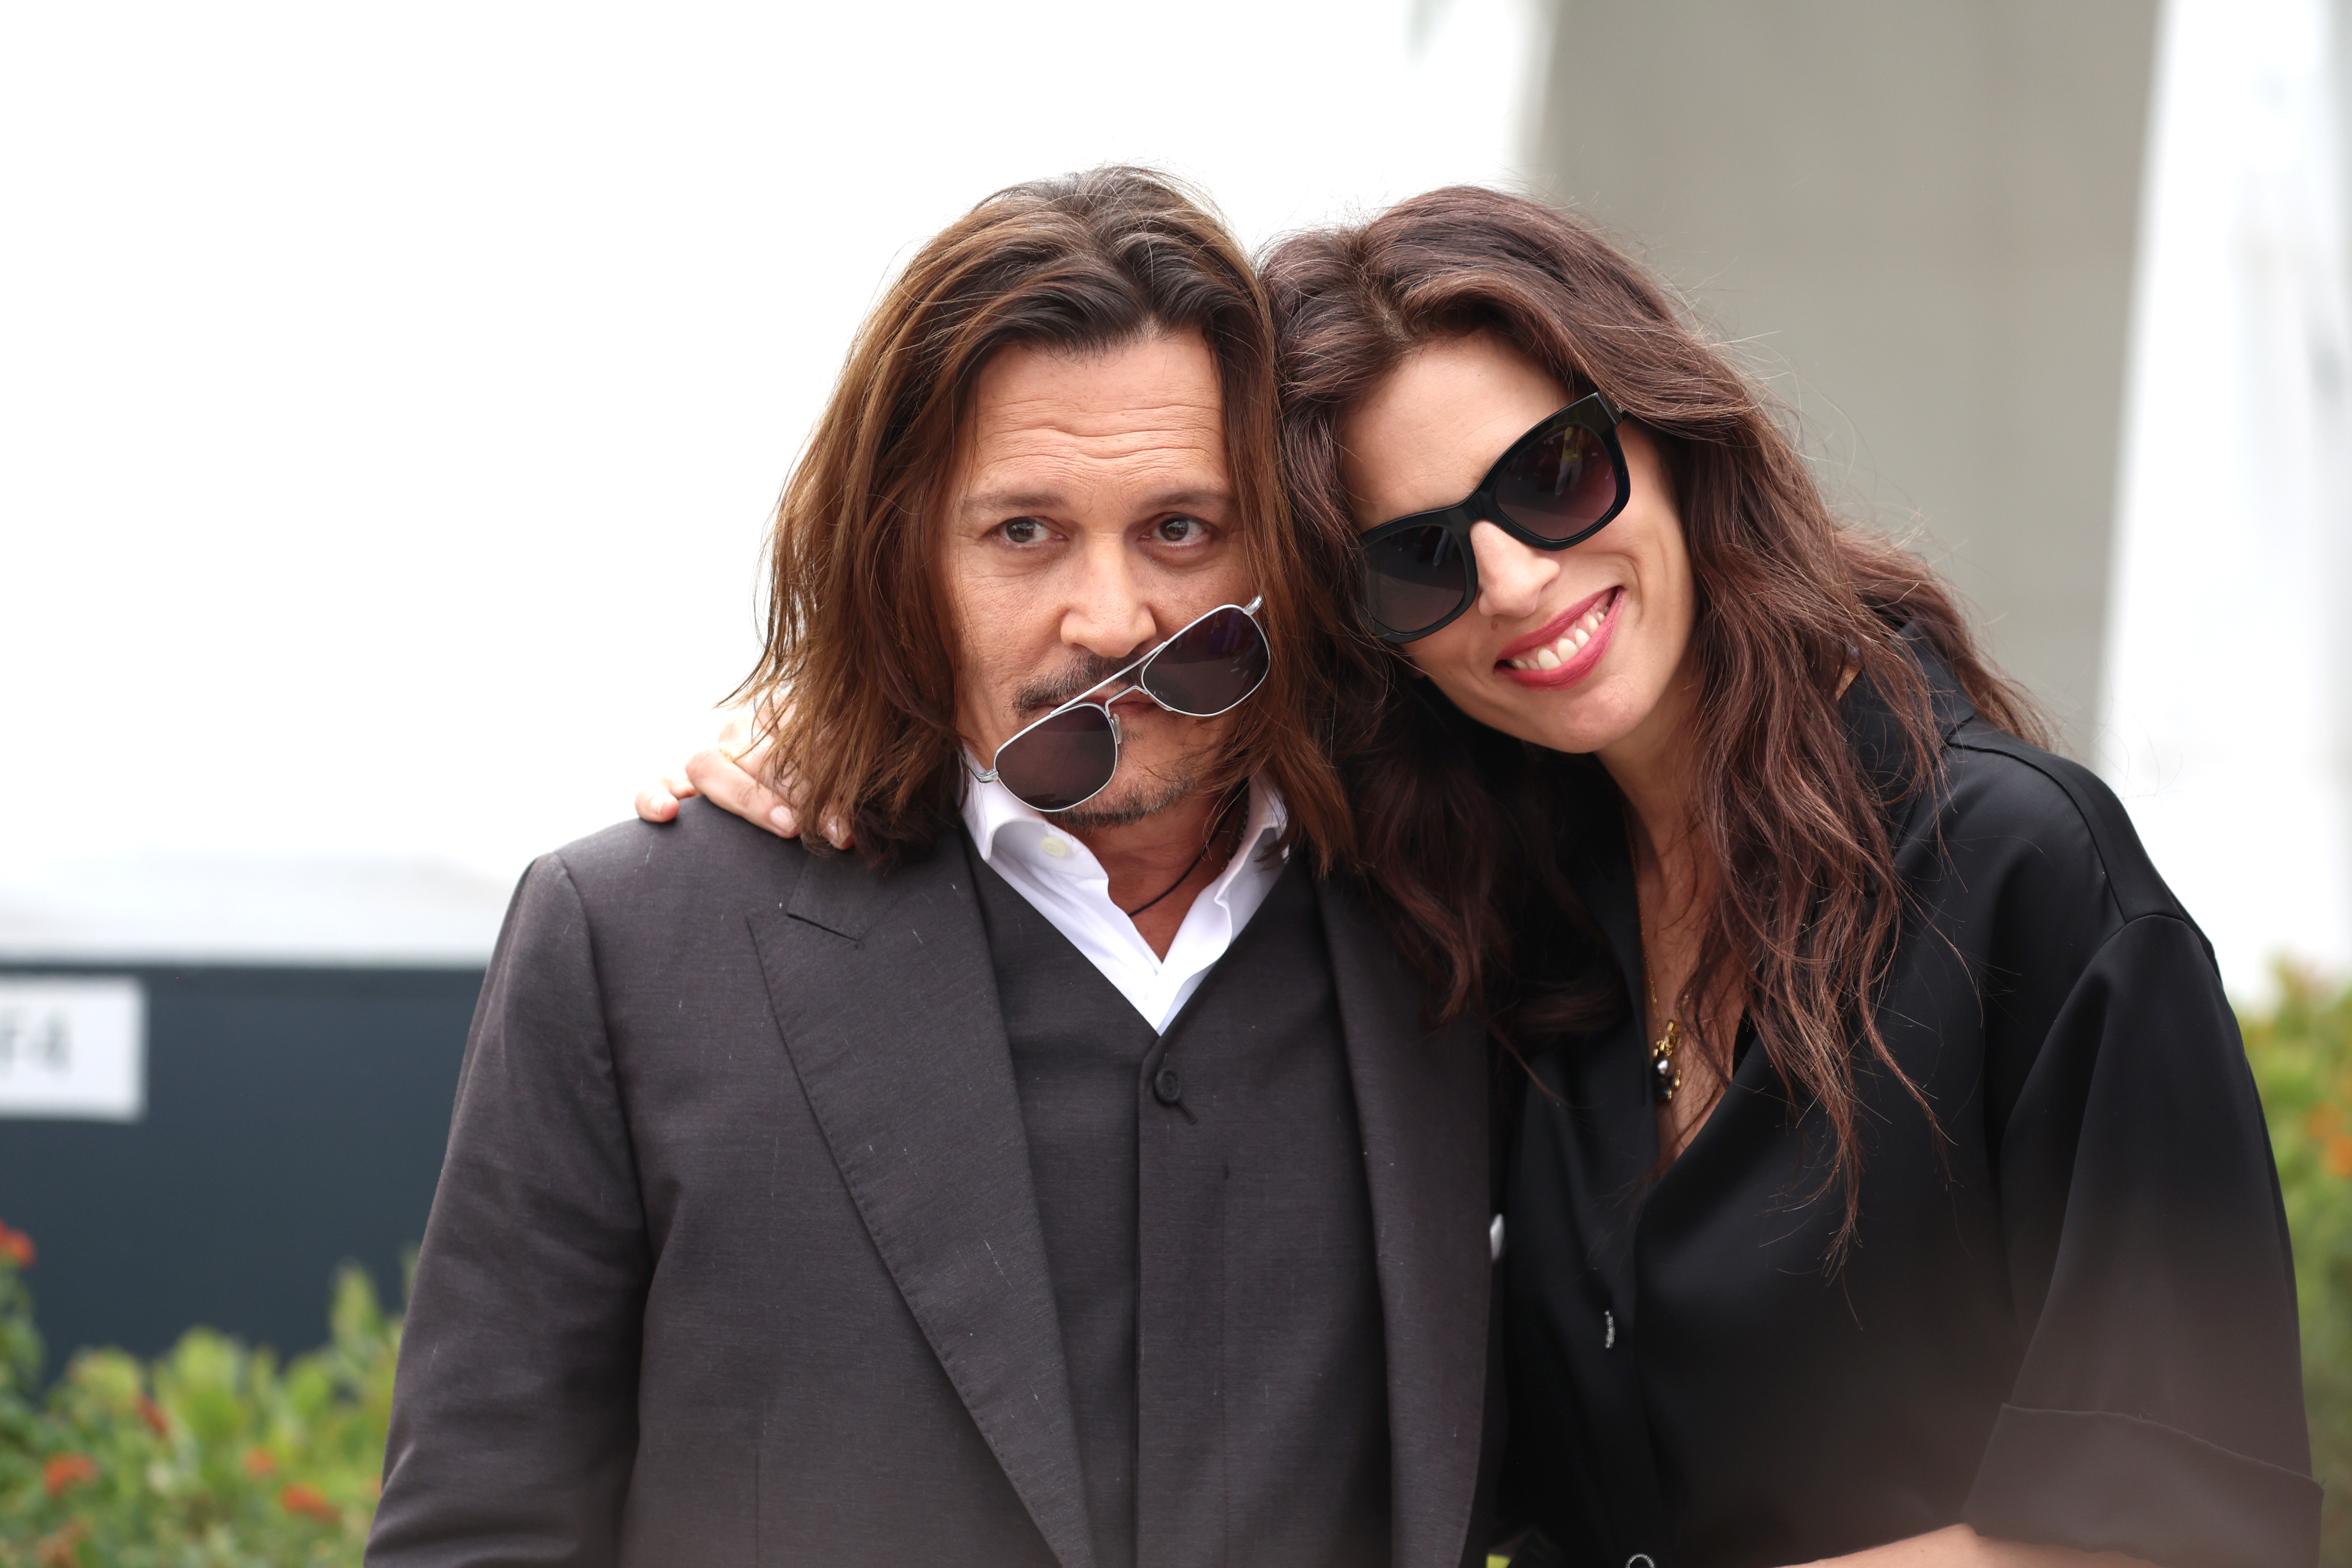 Johnny Depp and Maiwenn attend the "Jeanne du Barry" photocall at the 76th annual Cannes film festival at Palais des Festivals o,n May 17, 2023, in Cannes, France | Source: Getty Images